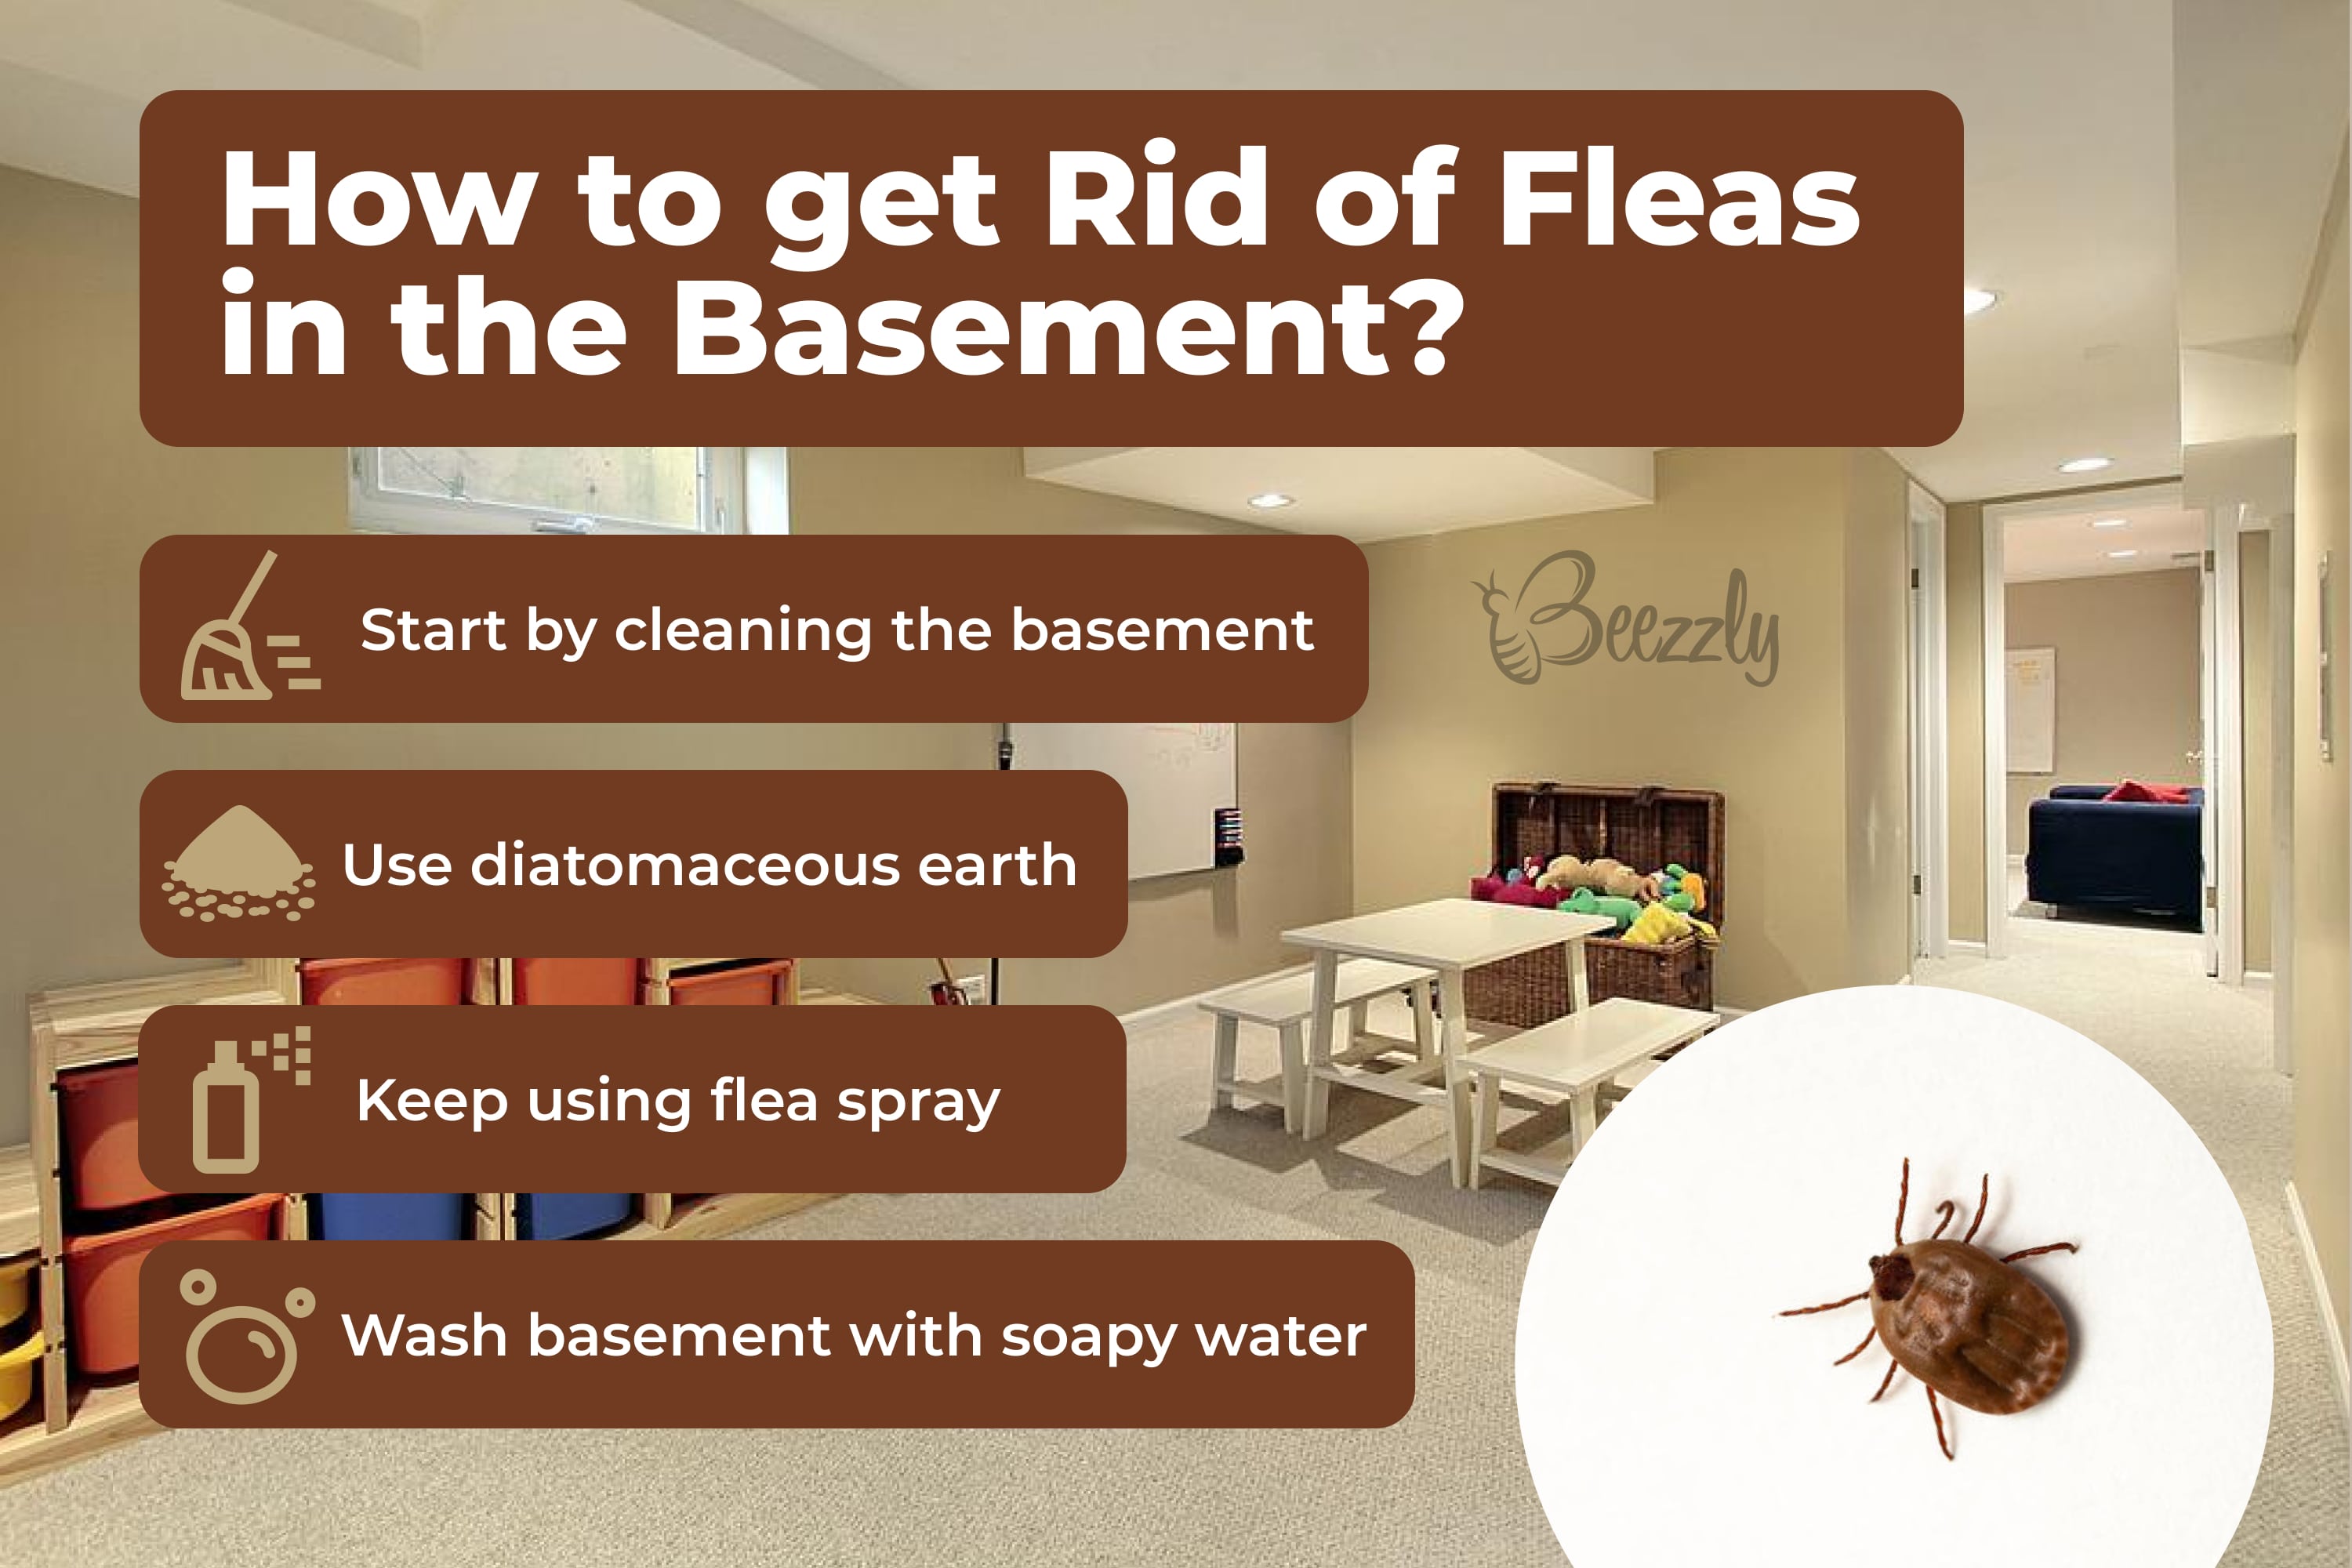 How to get rid of fleas in the basement